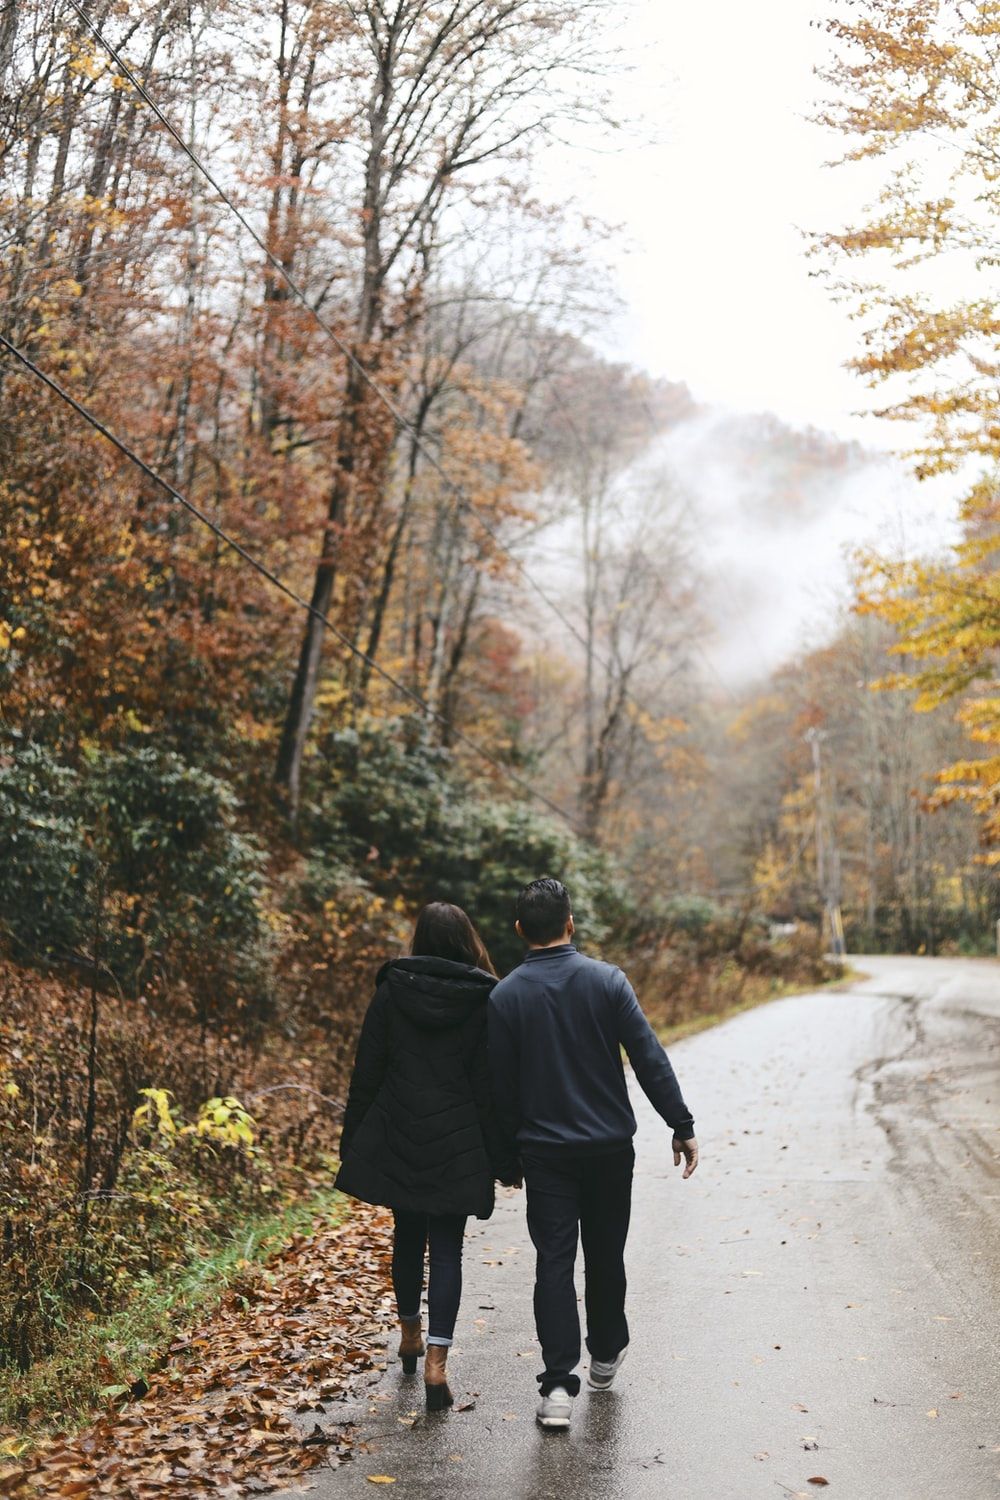 Couple Walking Picture. Download Free Image